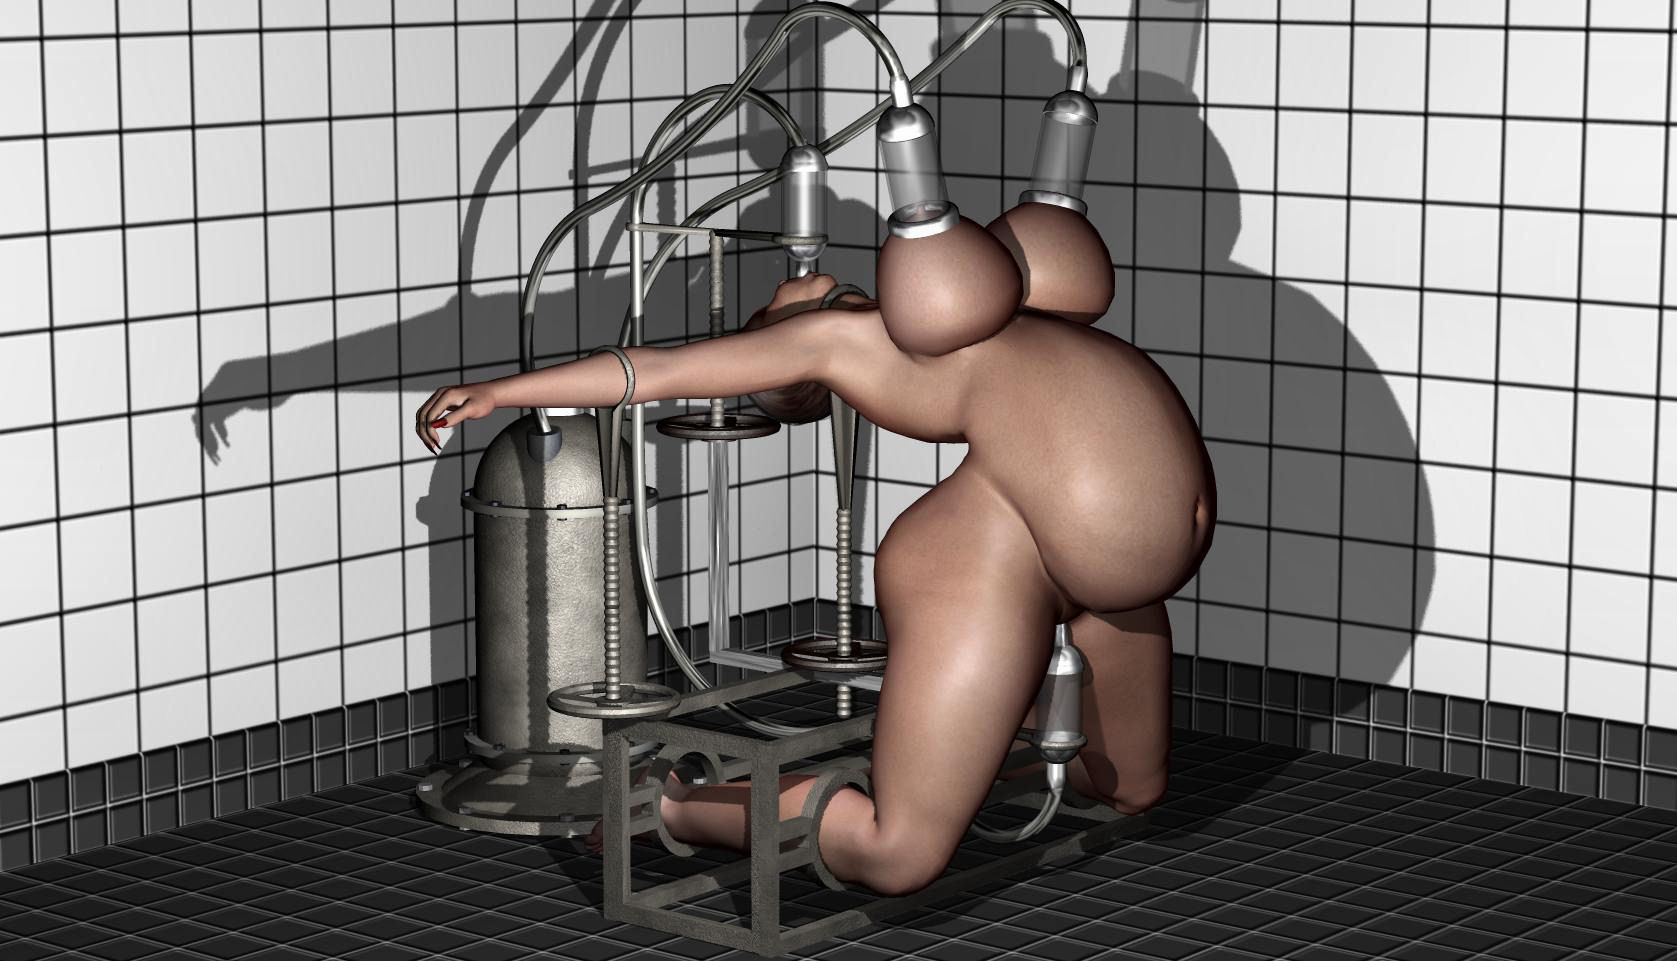 Nepiophile Porn Animated - Free 3d cartoon and 3d comics porn galleries